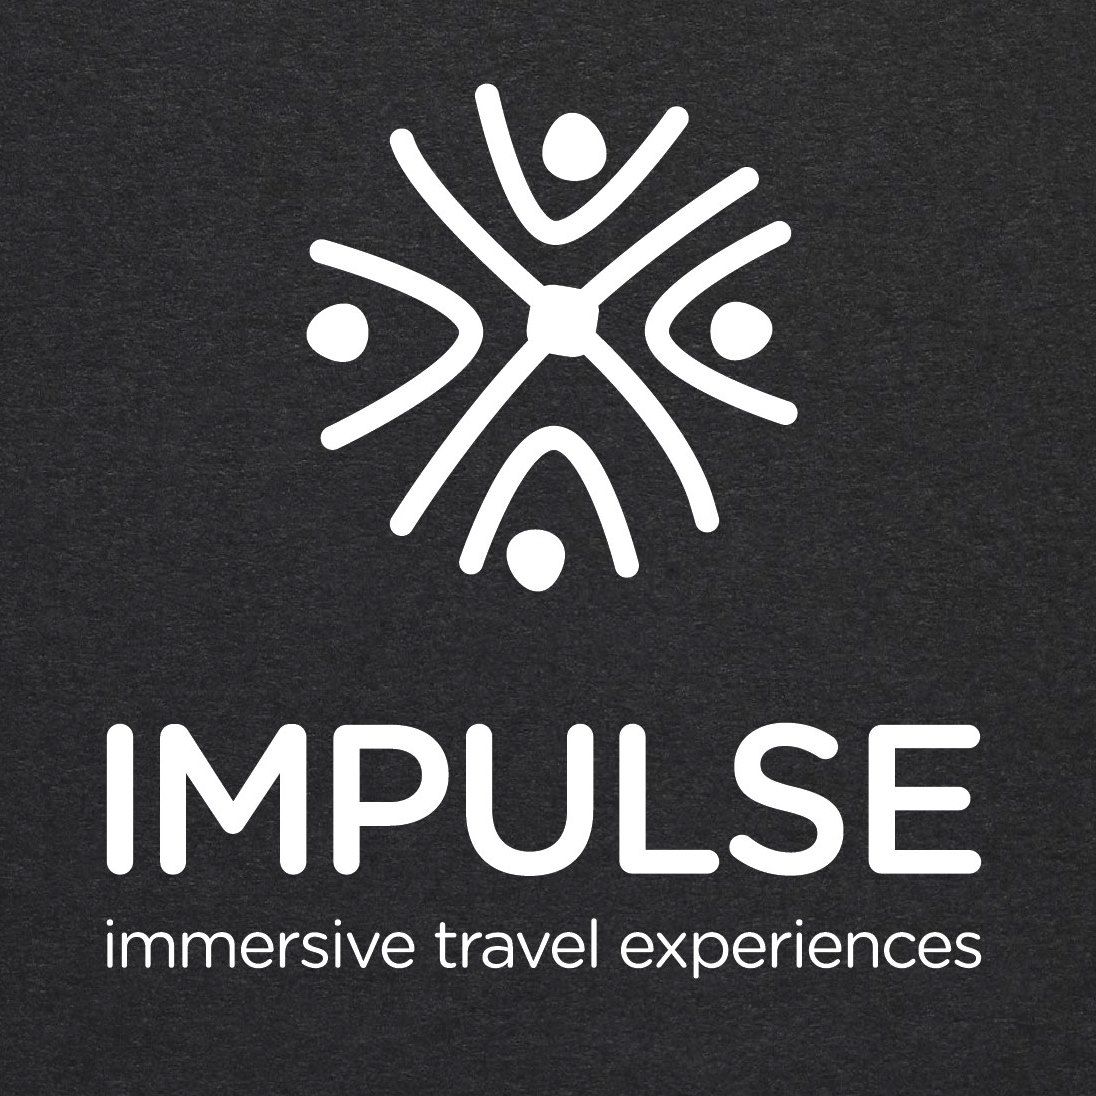 the impulse travel group pty limited